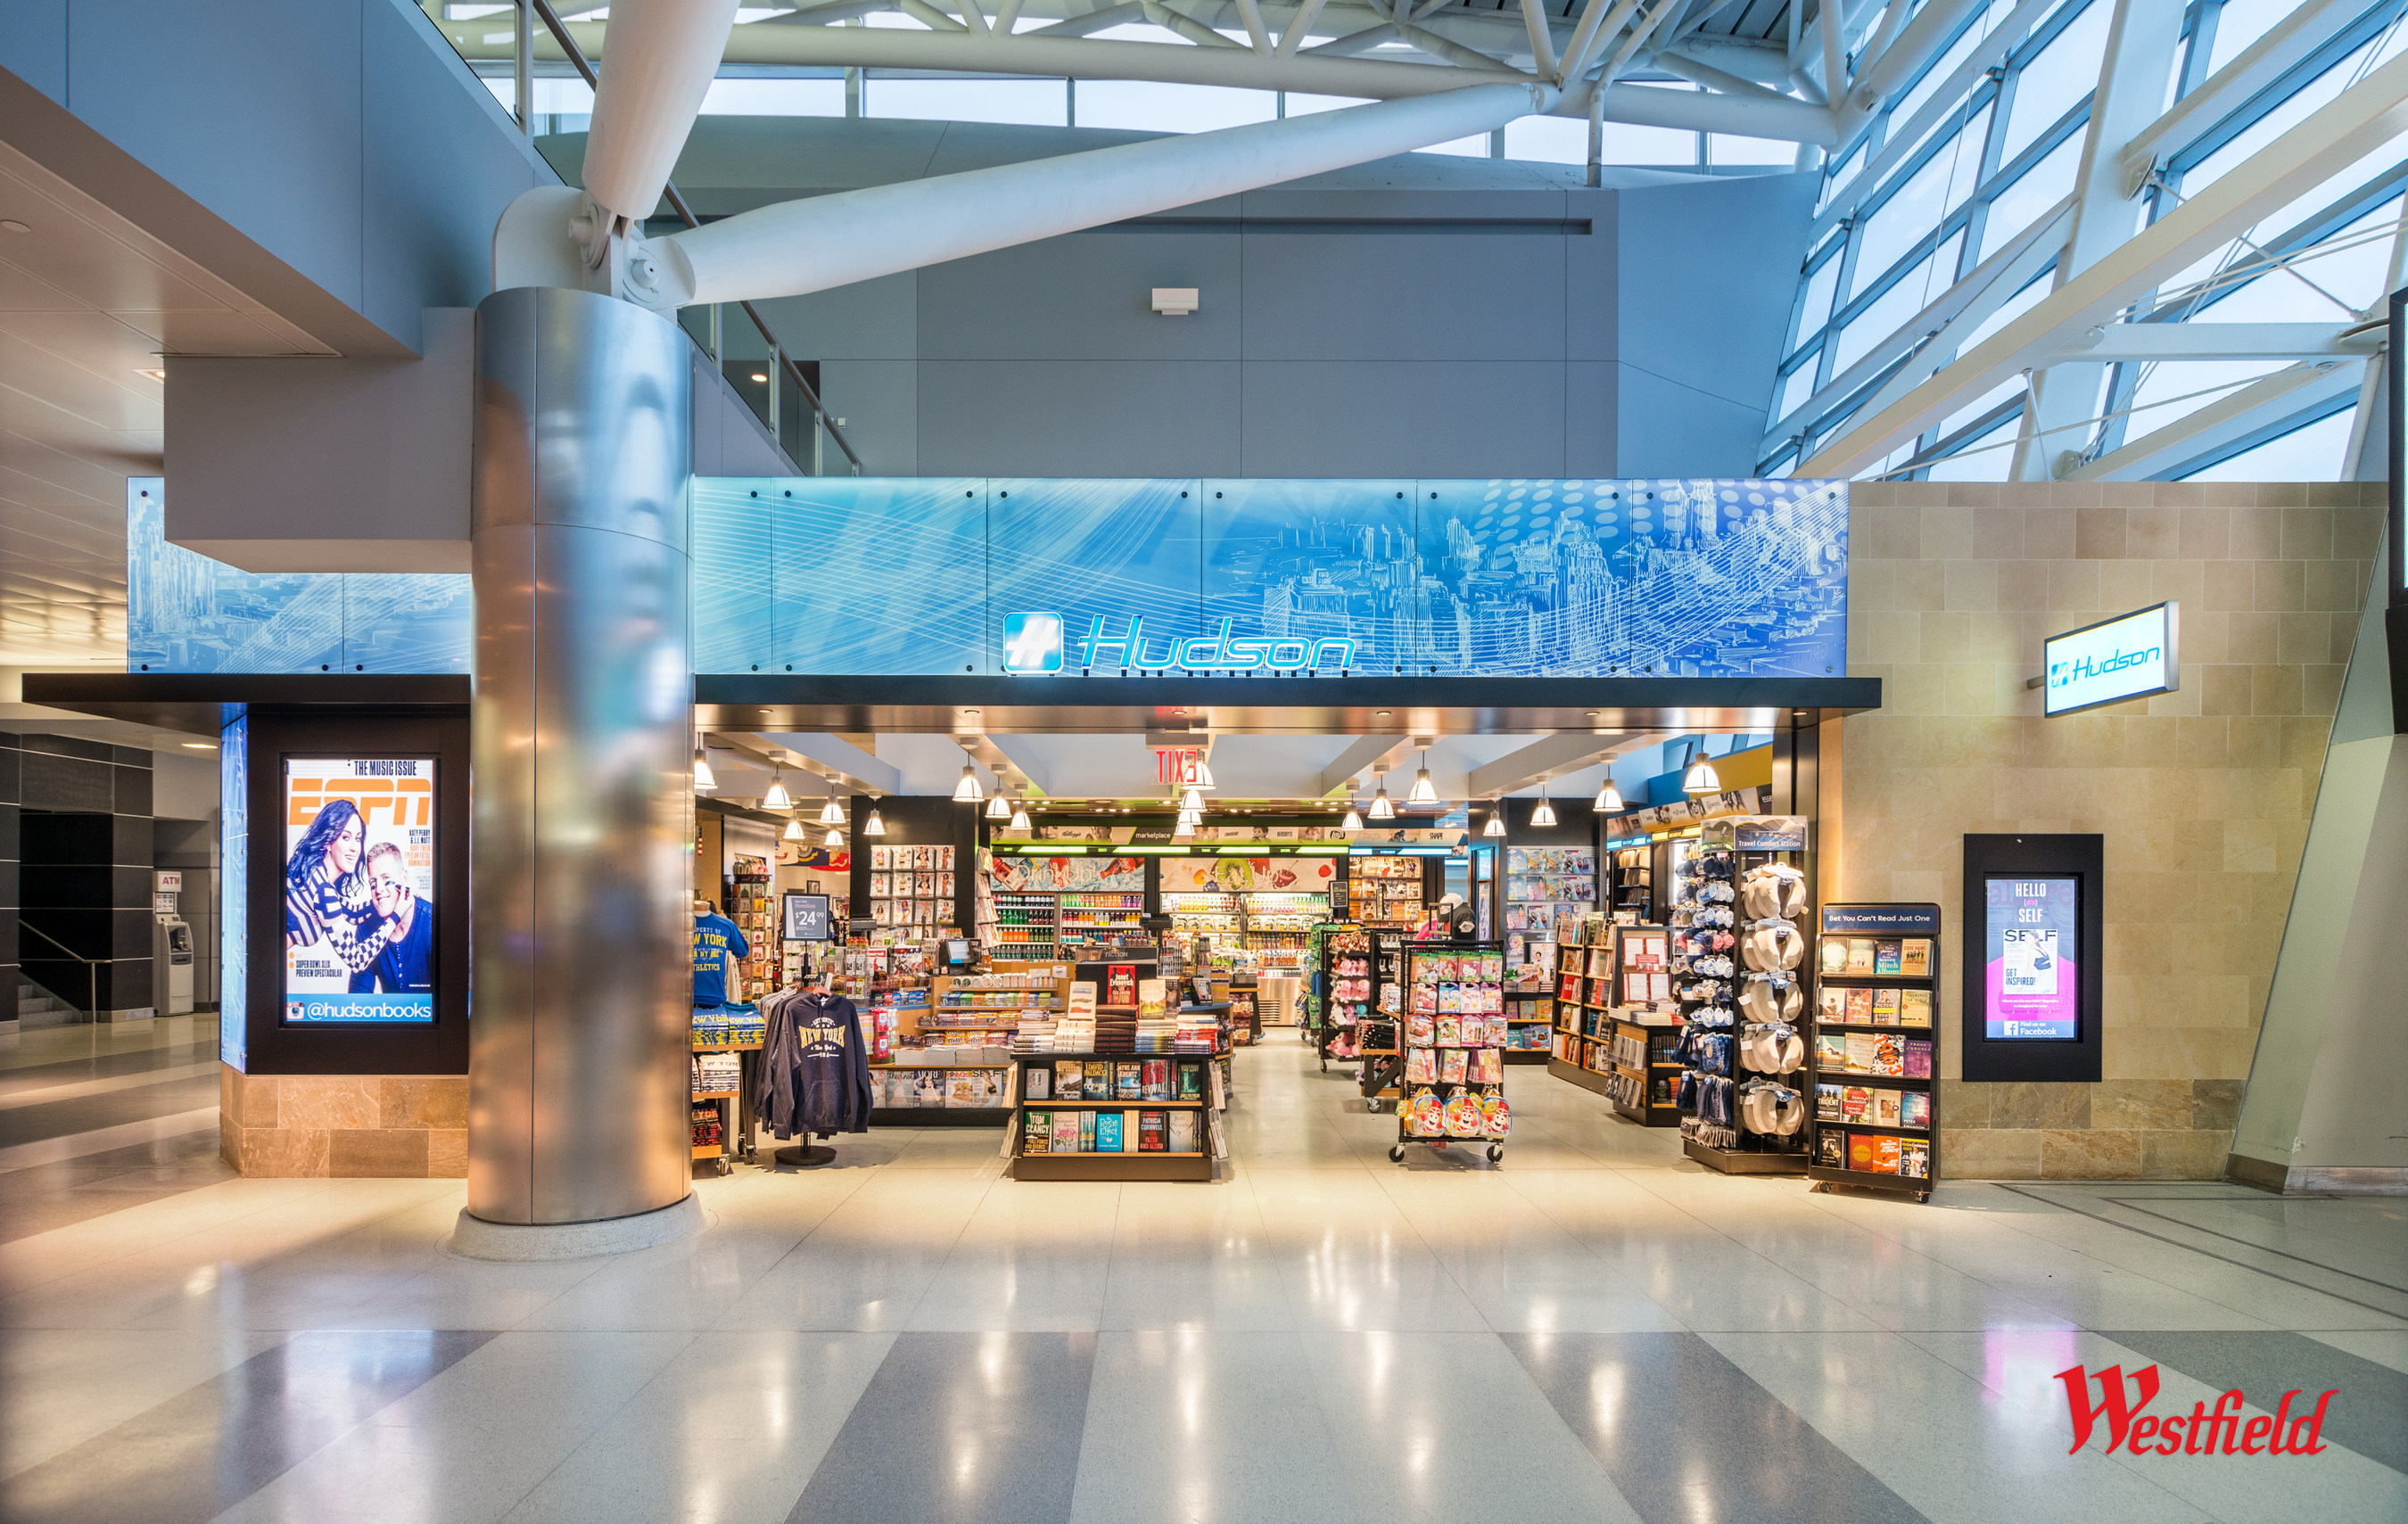 Eight new shops - including Victoria's Secret and seven renovated Hudson locations - are now open at John F. Kennedy International Airport's Terminal 8, announced airport retail terminal developer Westfield and premier travel retailer Hudson Group.